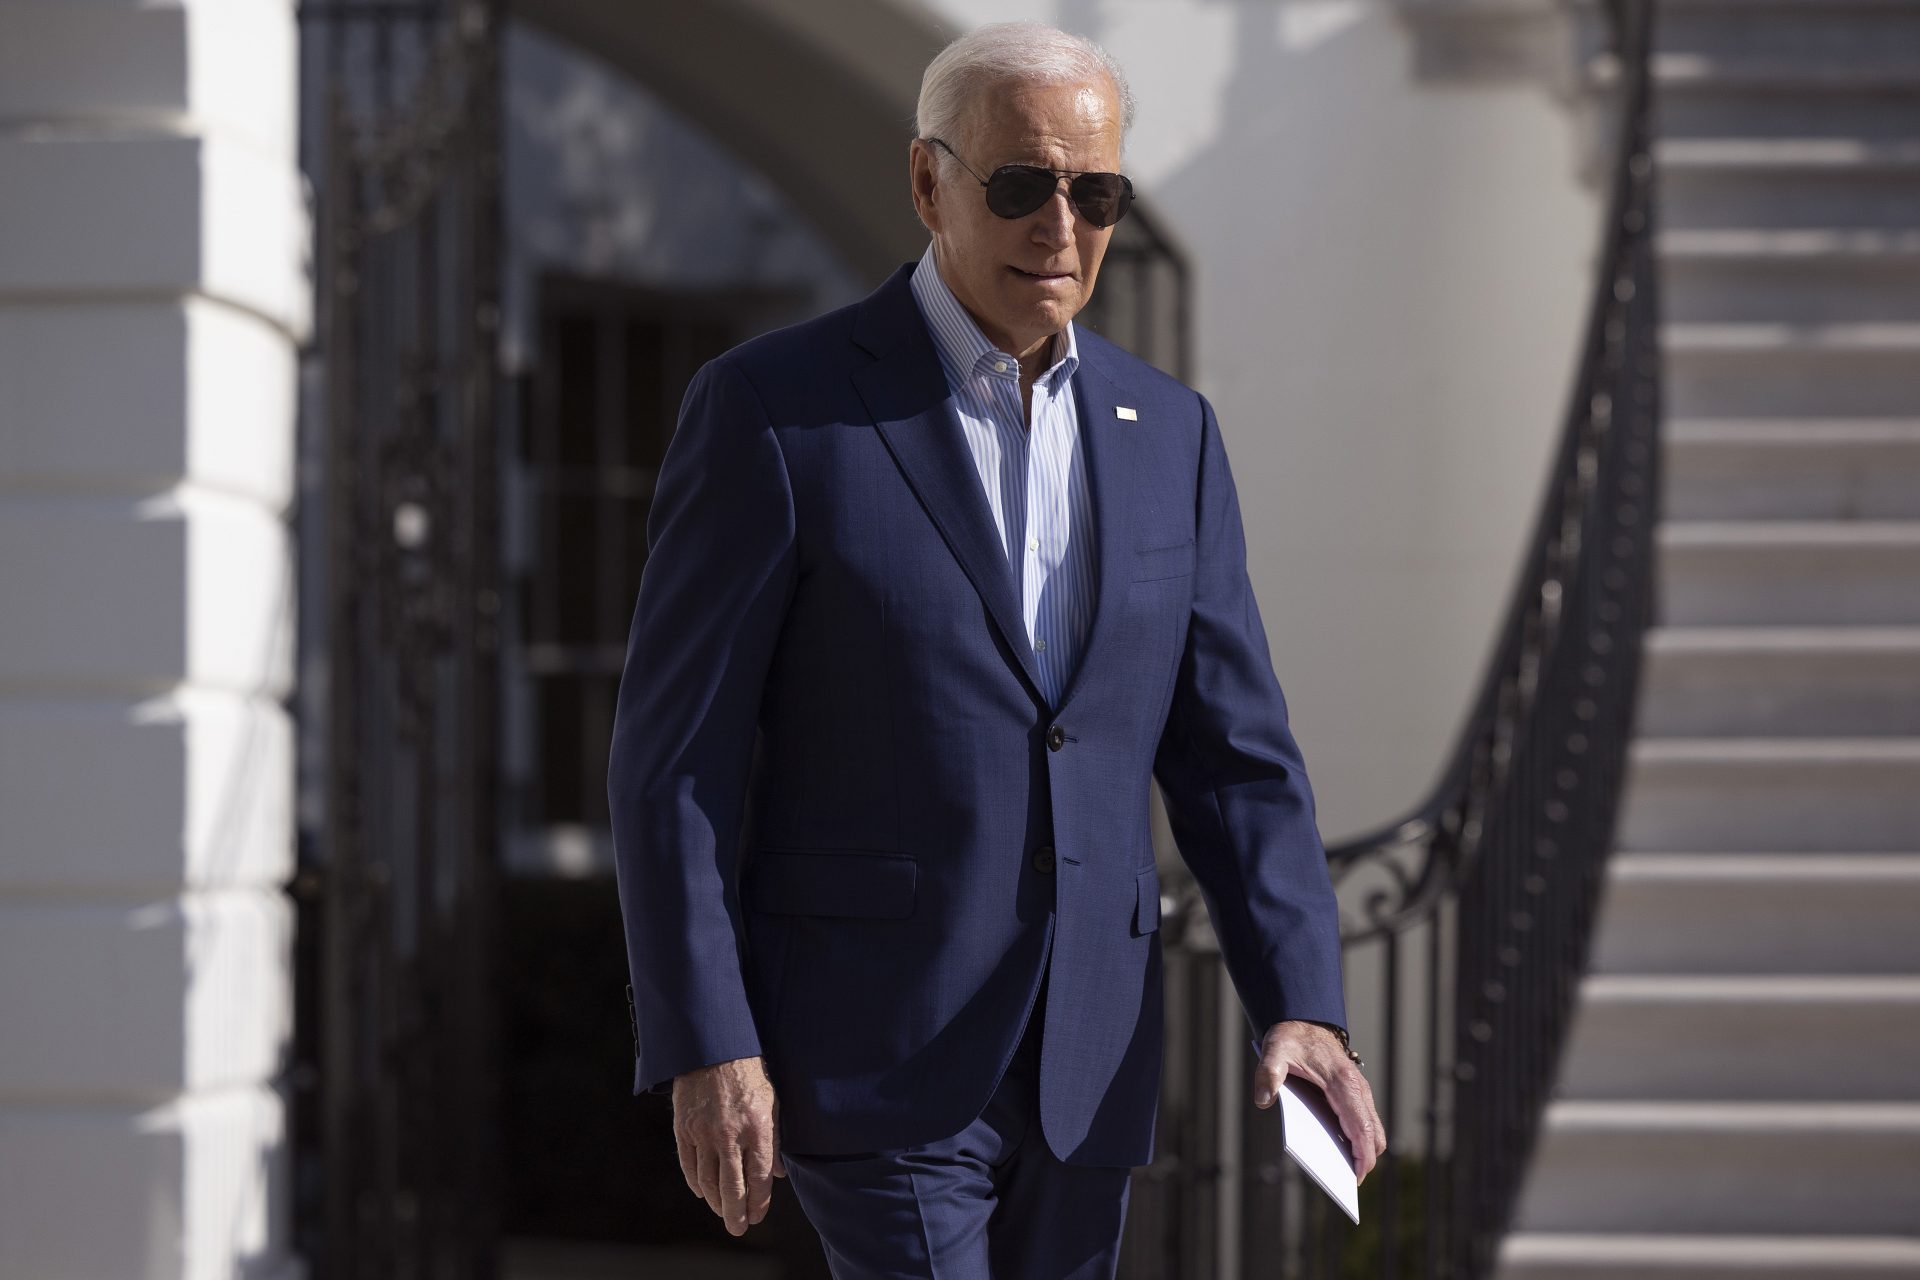 Is Biden fit for four more years?